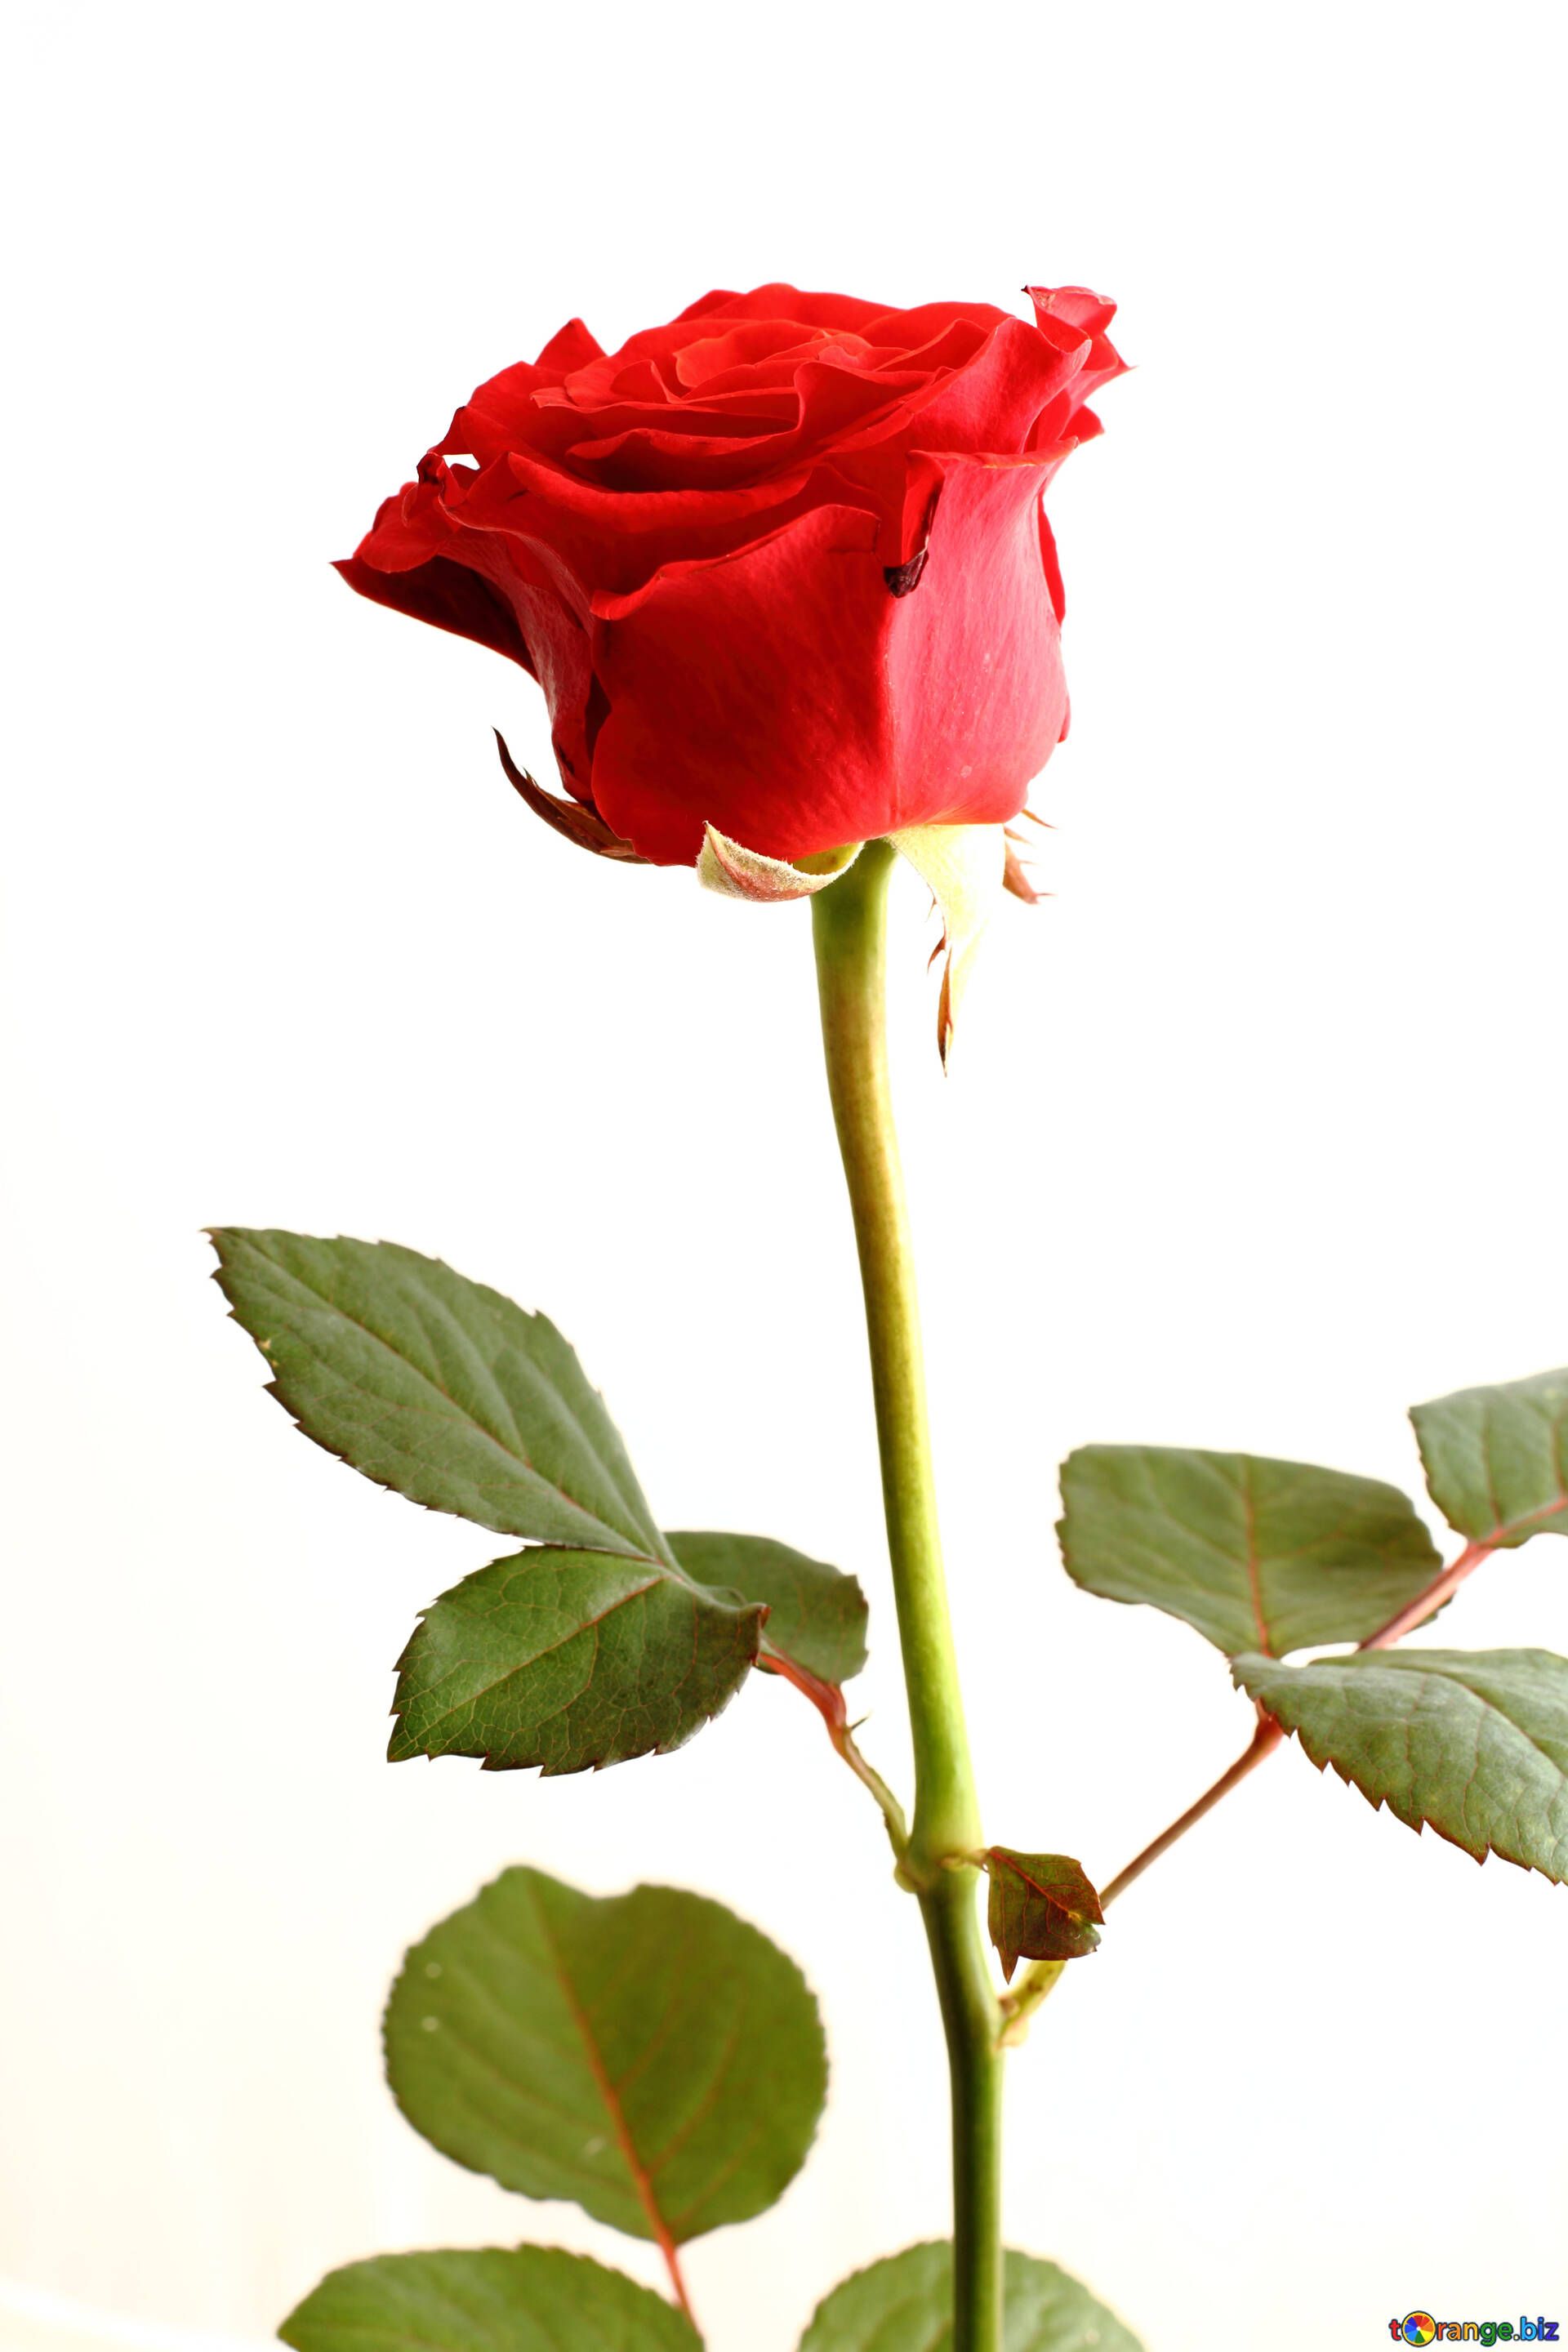 A whole rose on a white background flower red rose rose flower № 17044